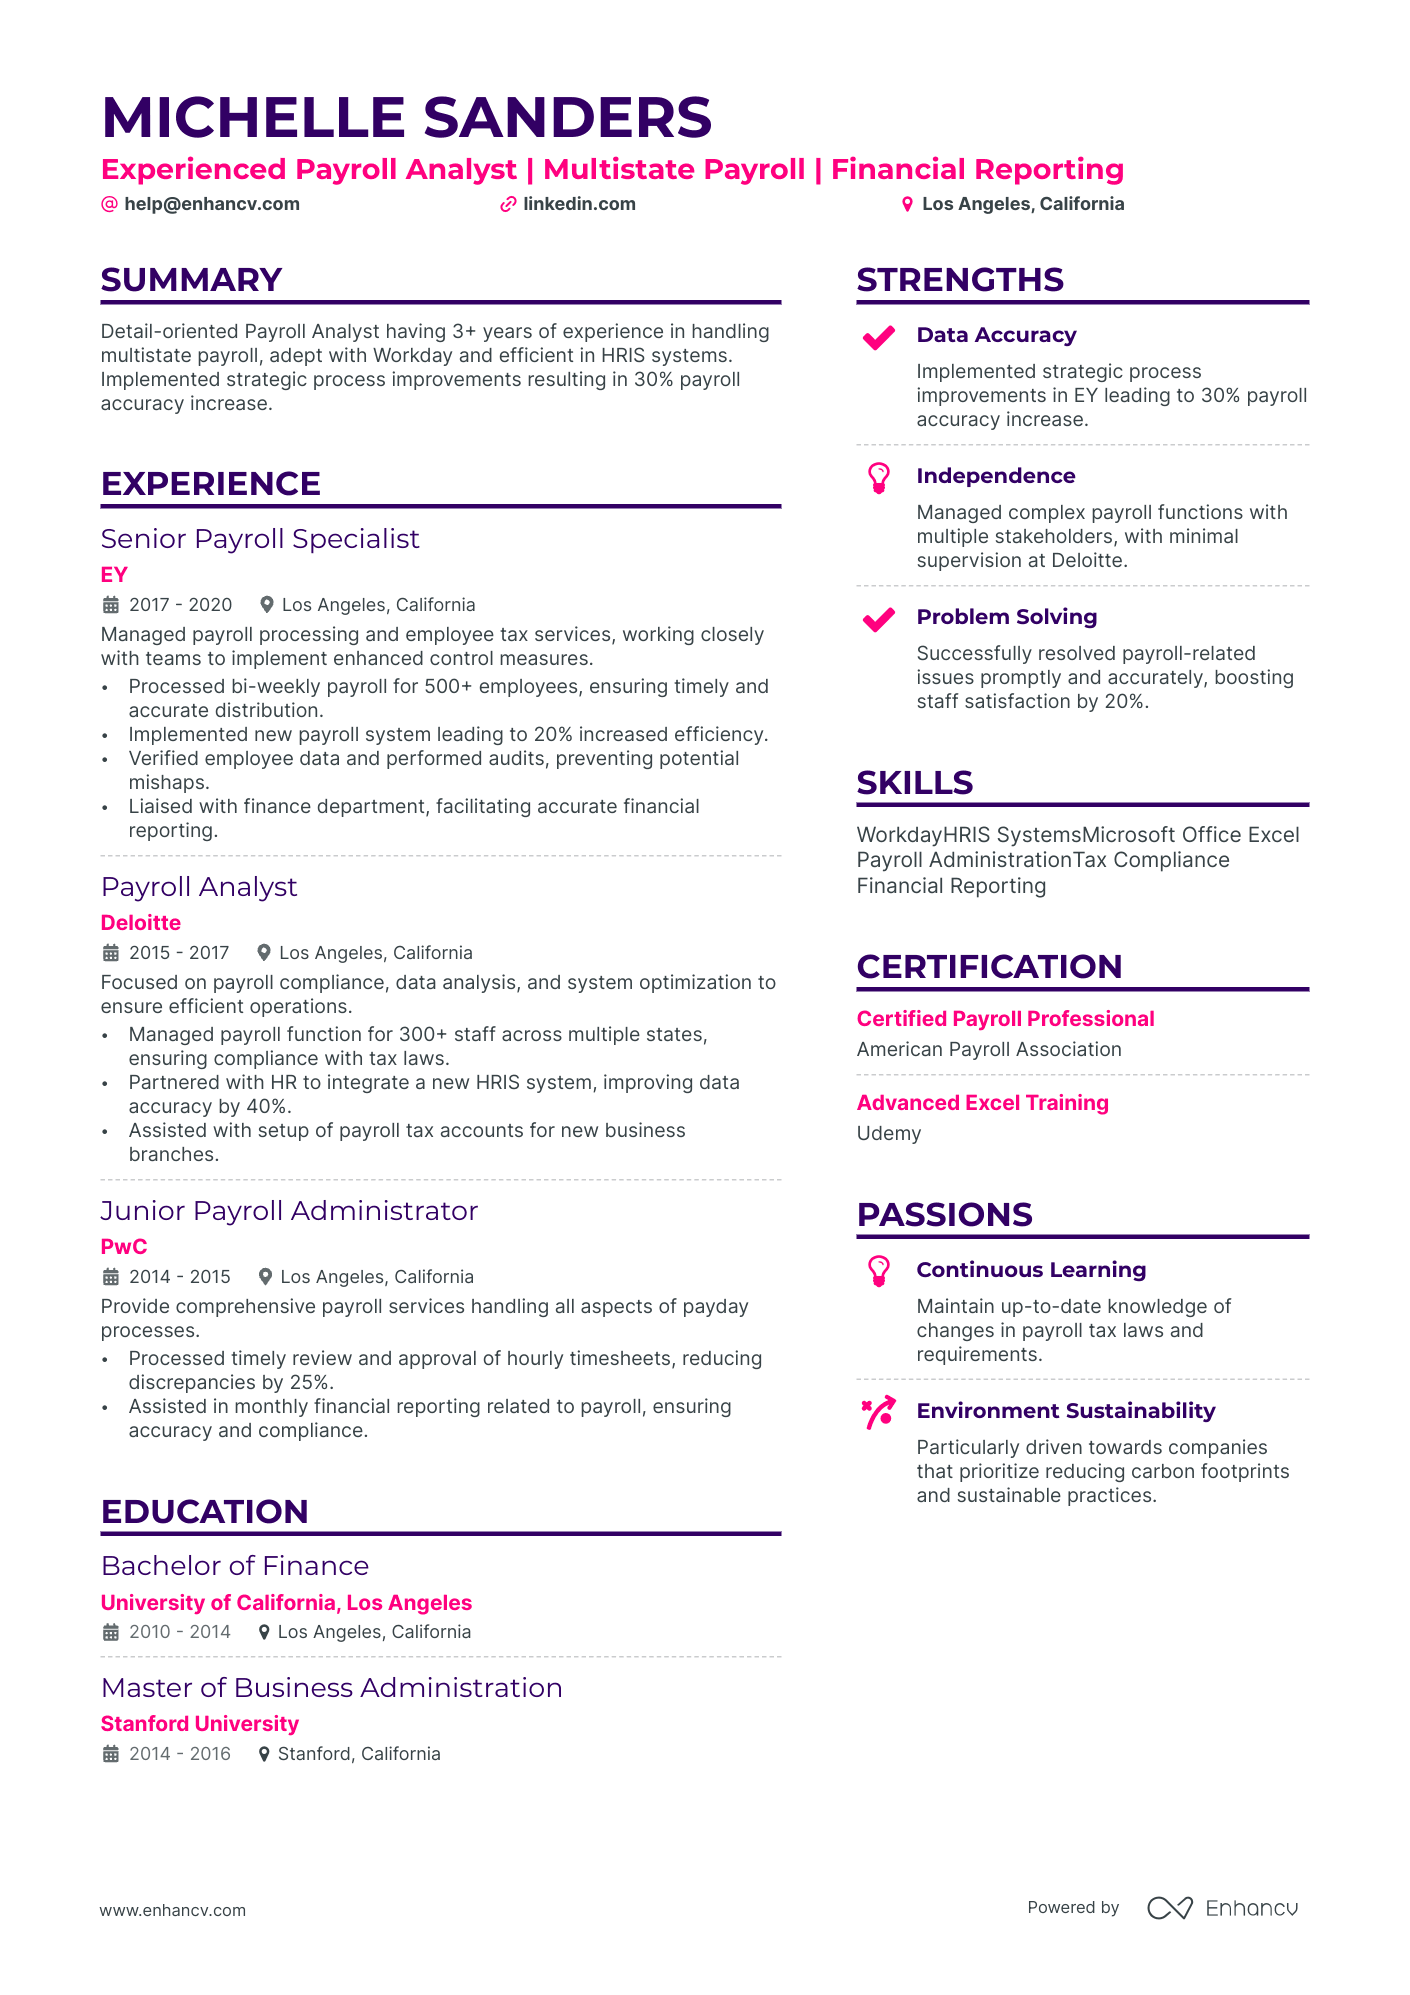 Payroll Analyst resume example